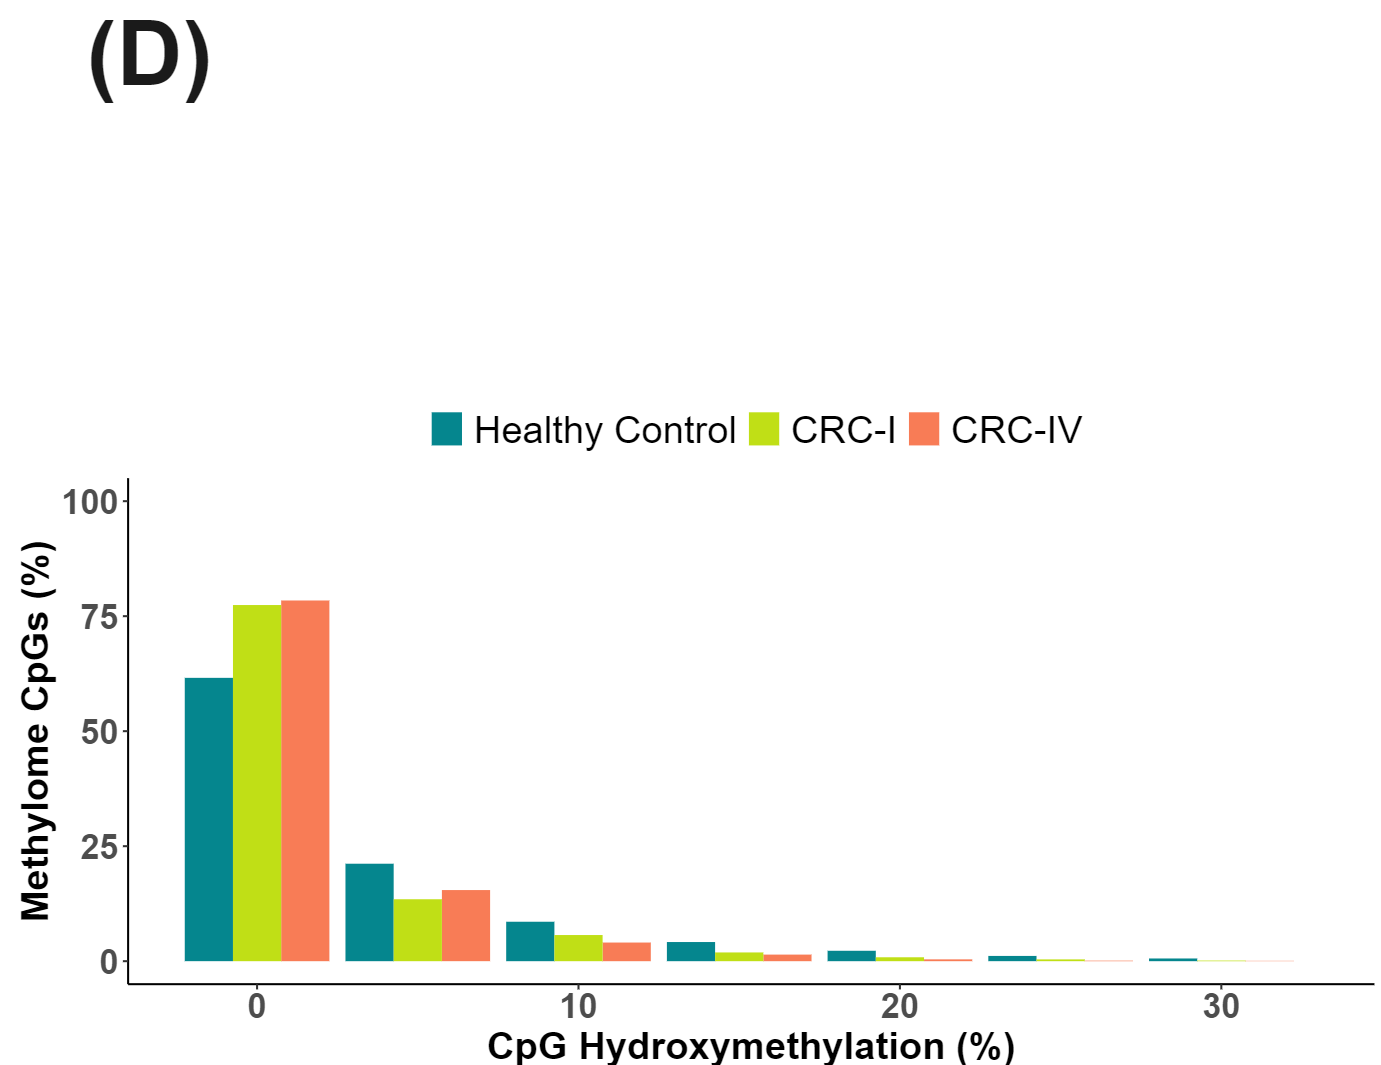 CpG hydroxymethylation % for healthy and CRC cfDNA generated with duet evoC